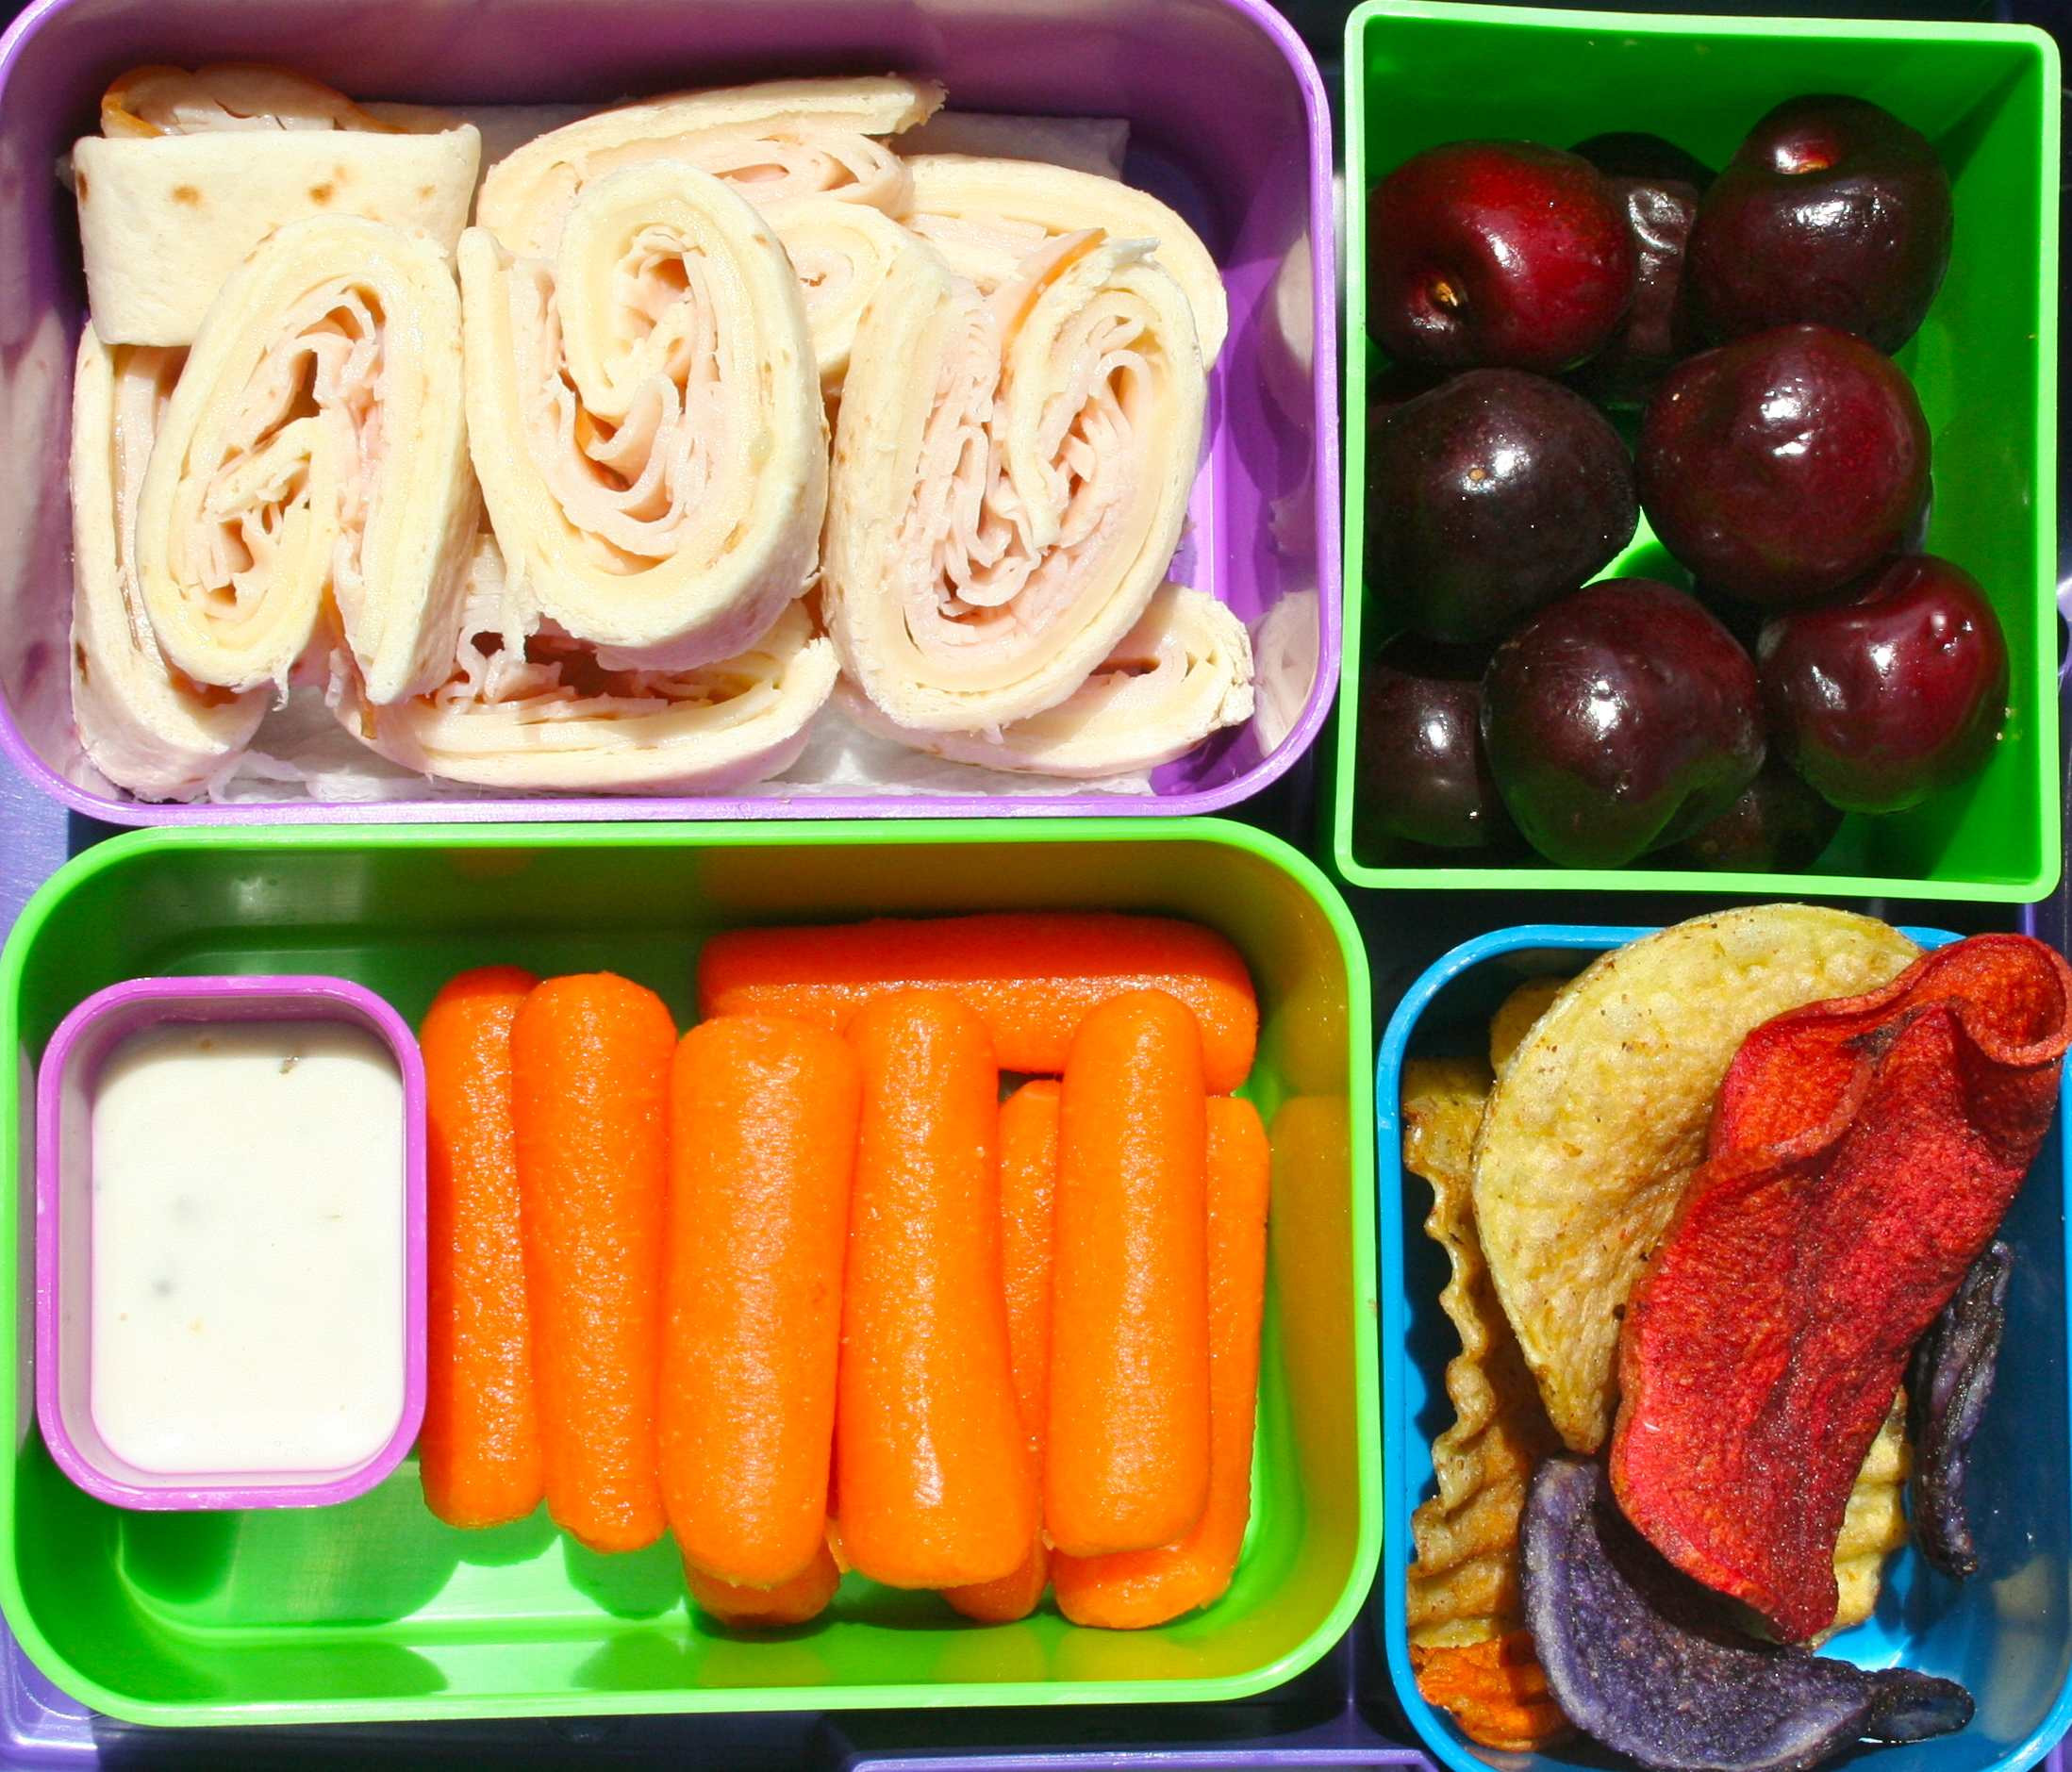 Pack Healthy School Lunches
 Getting Back to School How to Pack Fresh Lunches